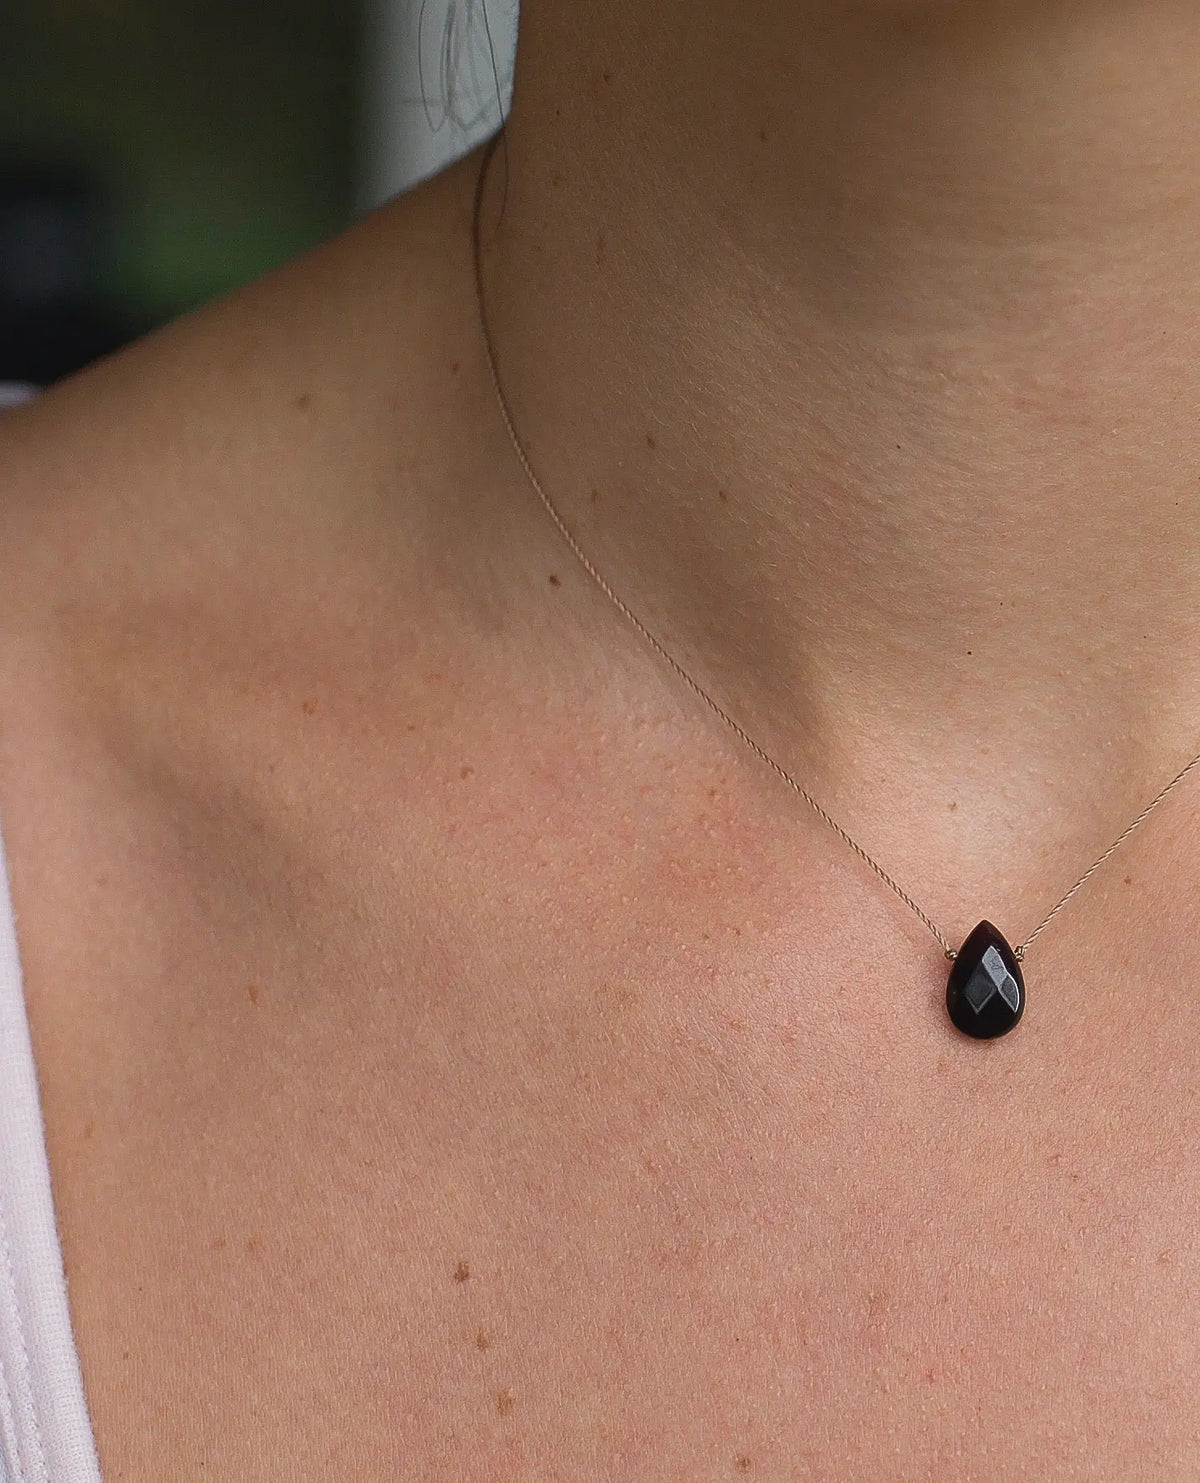 Stress Relief Soul-Full of Light Necklace - Black Onyx